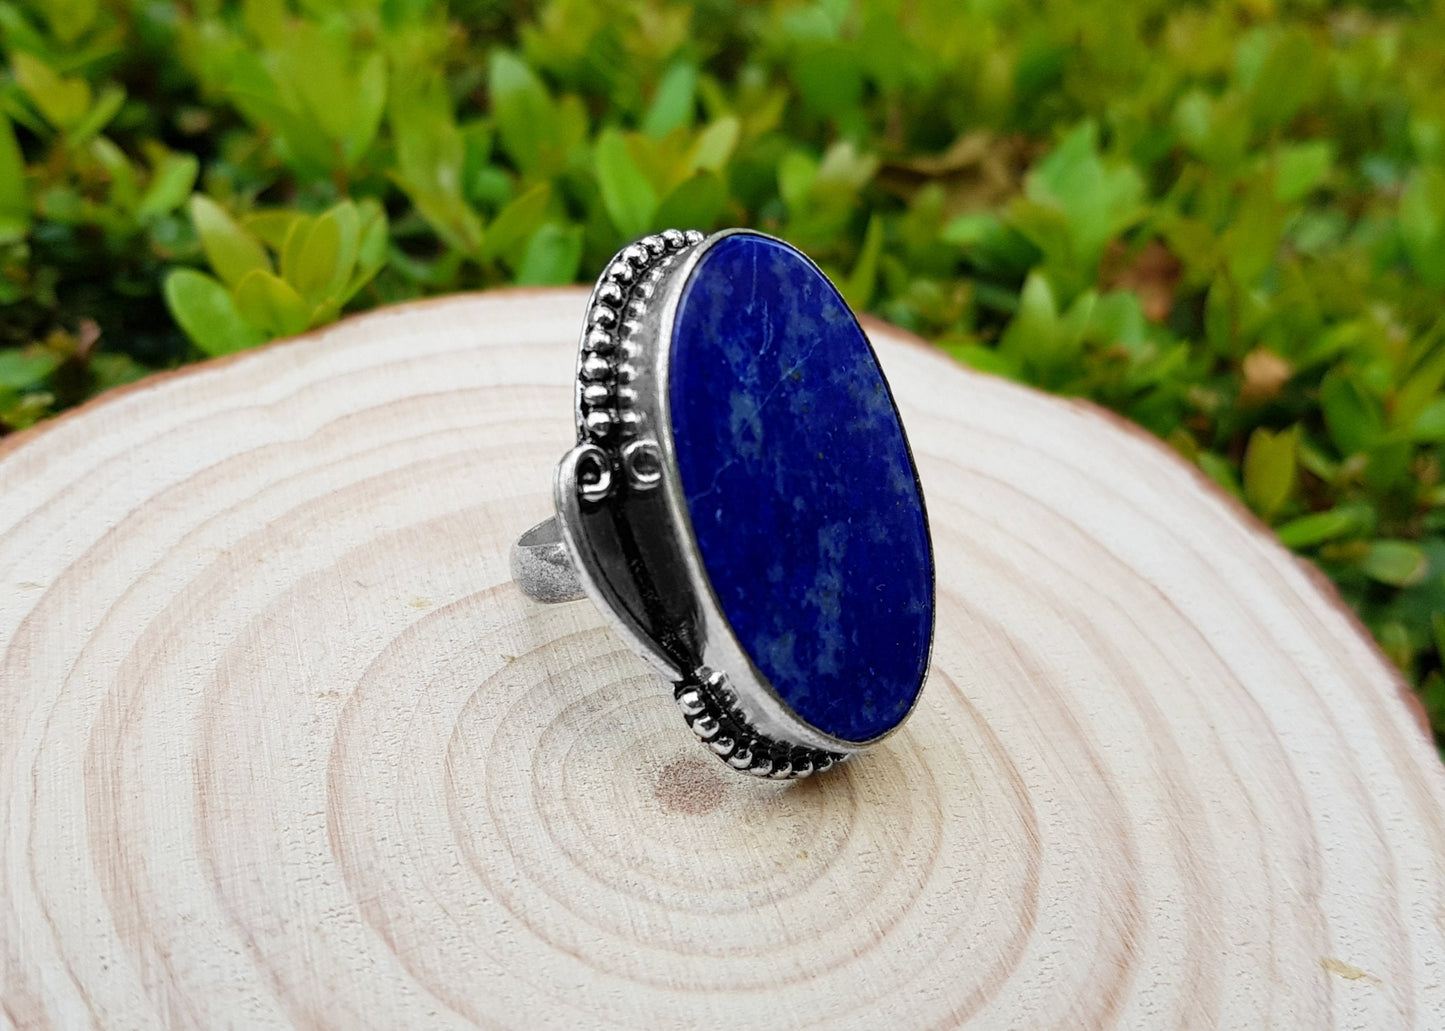 Lapis Lazuli Ring In Sterling Silver Size US 7 1/2 Big Statement Ring Boho Crystal Rings GypsyJewelry Unique Gift For Women